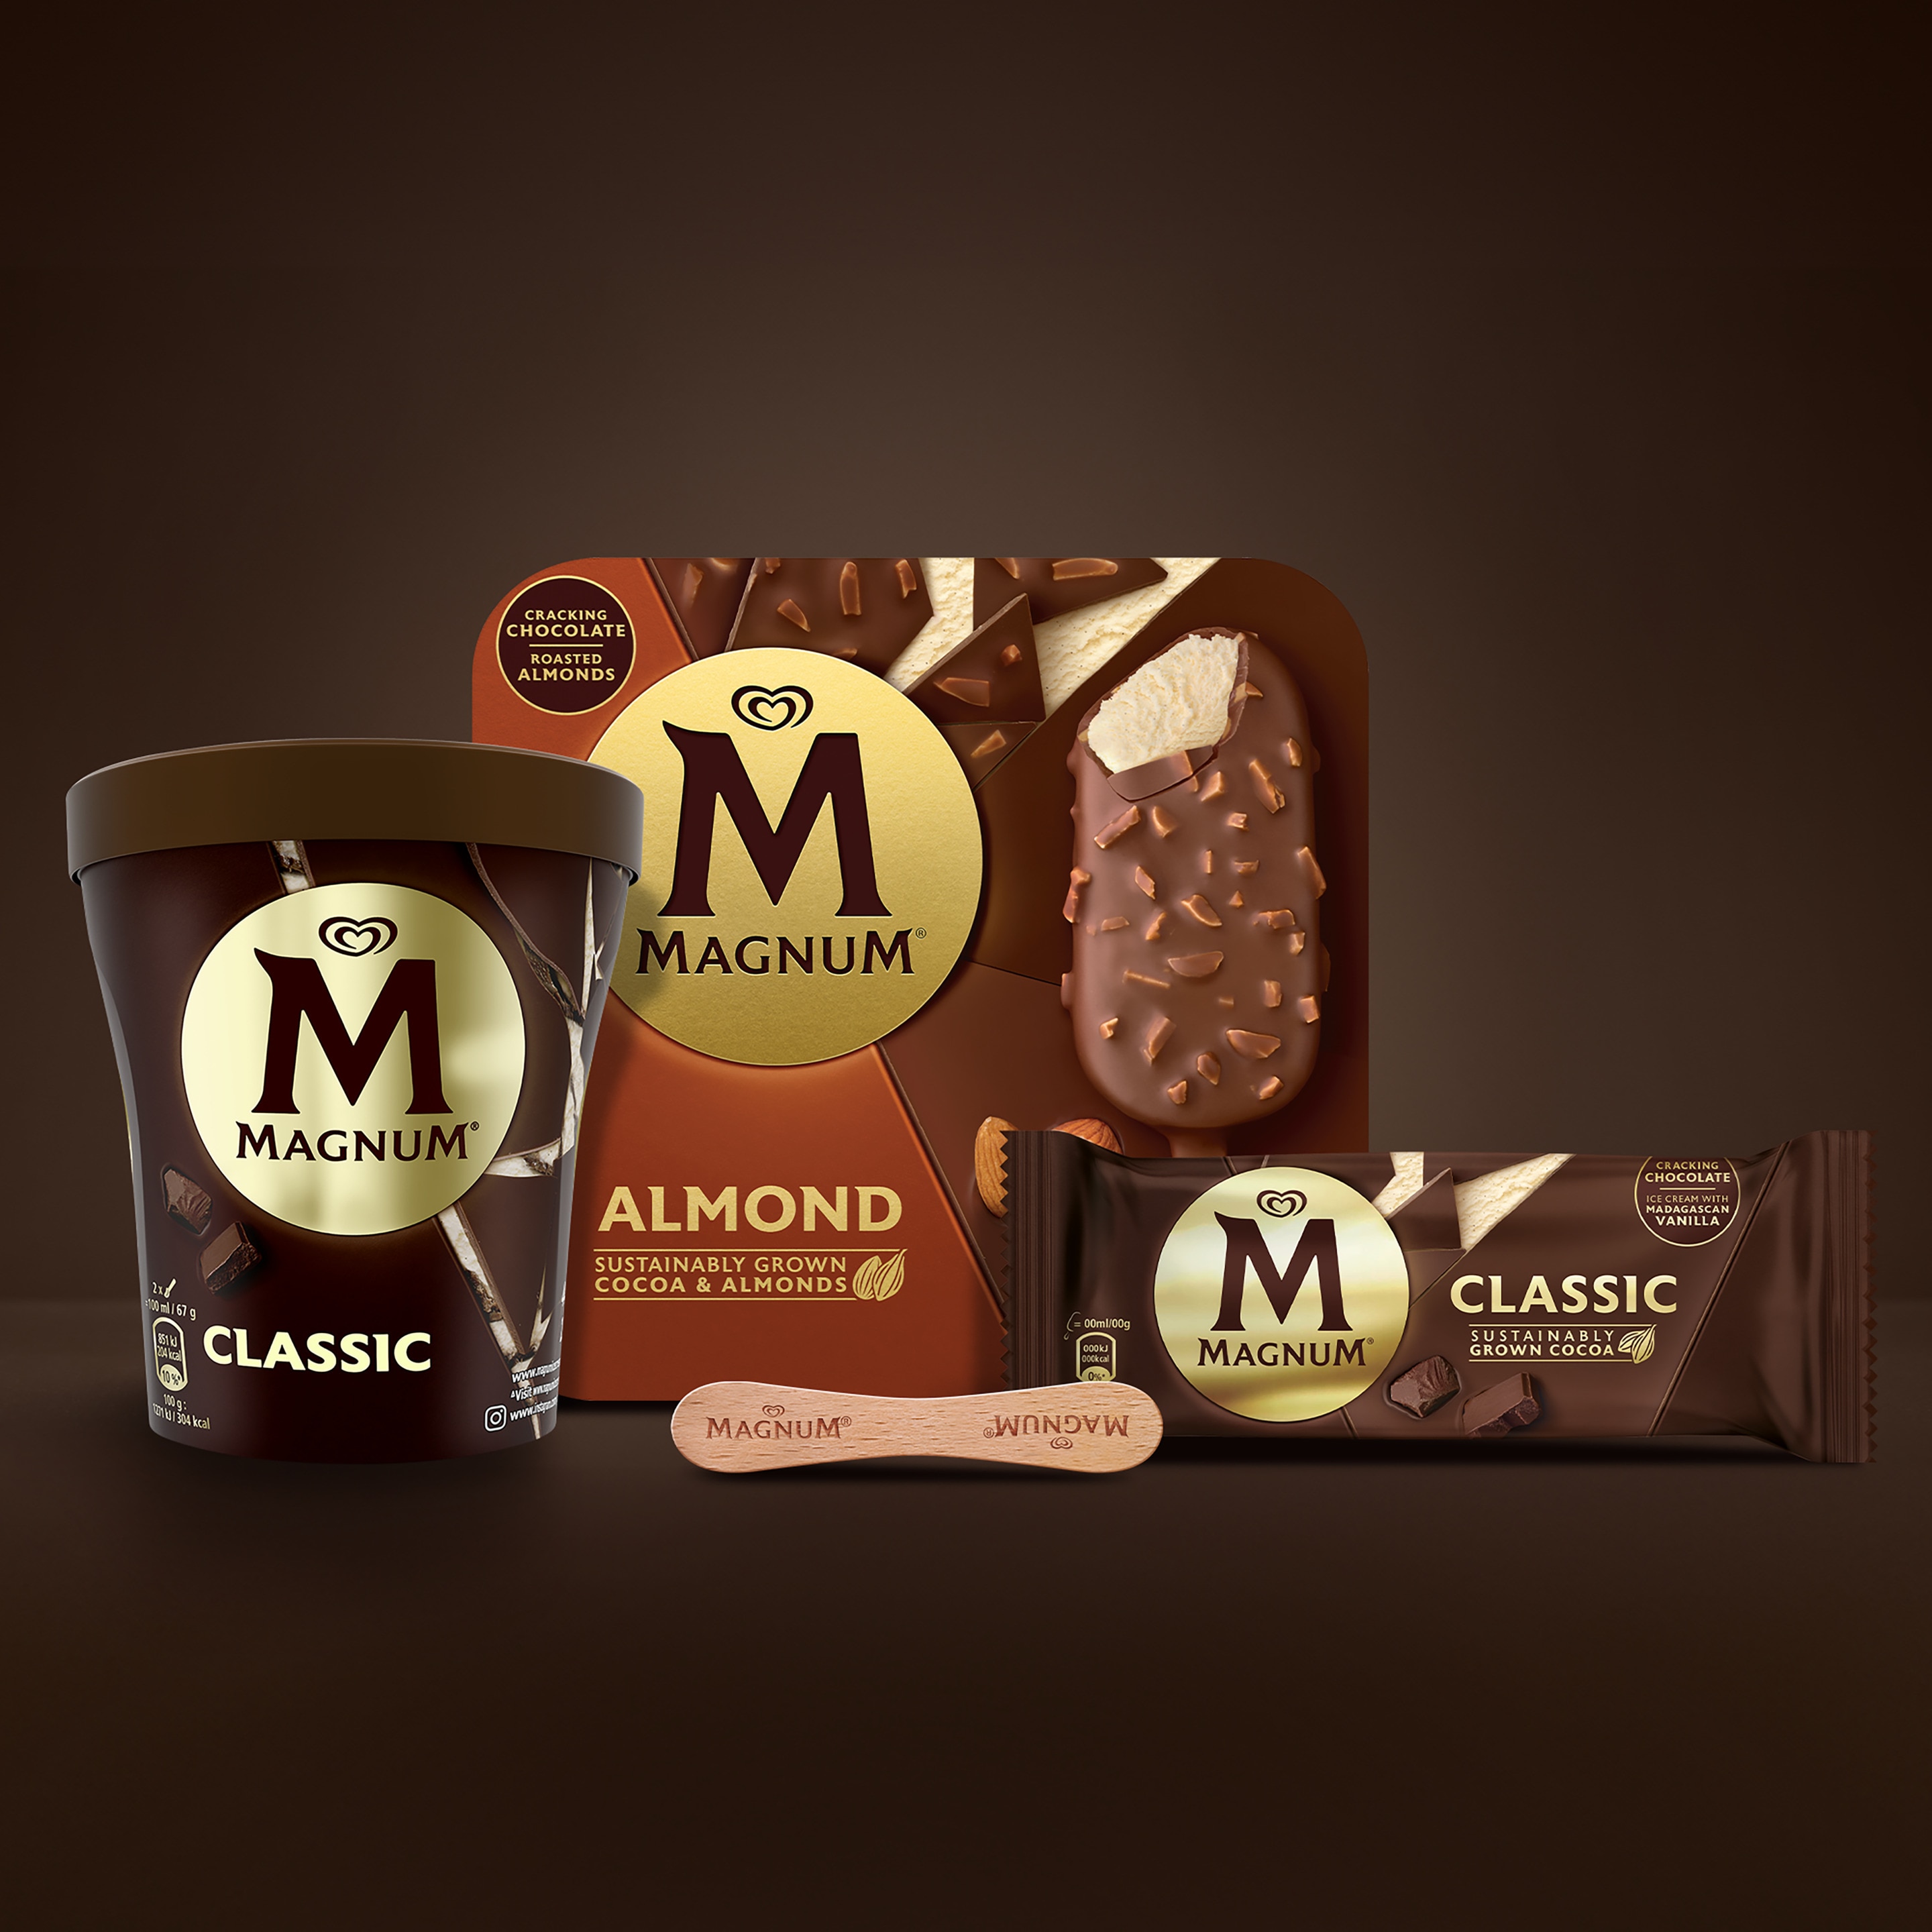 Composition of Magnum Classic Tub, Magnum Almond Multipack, Magnum Classic single pack, and Magnum wooden stick on brown background